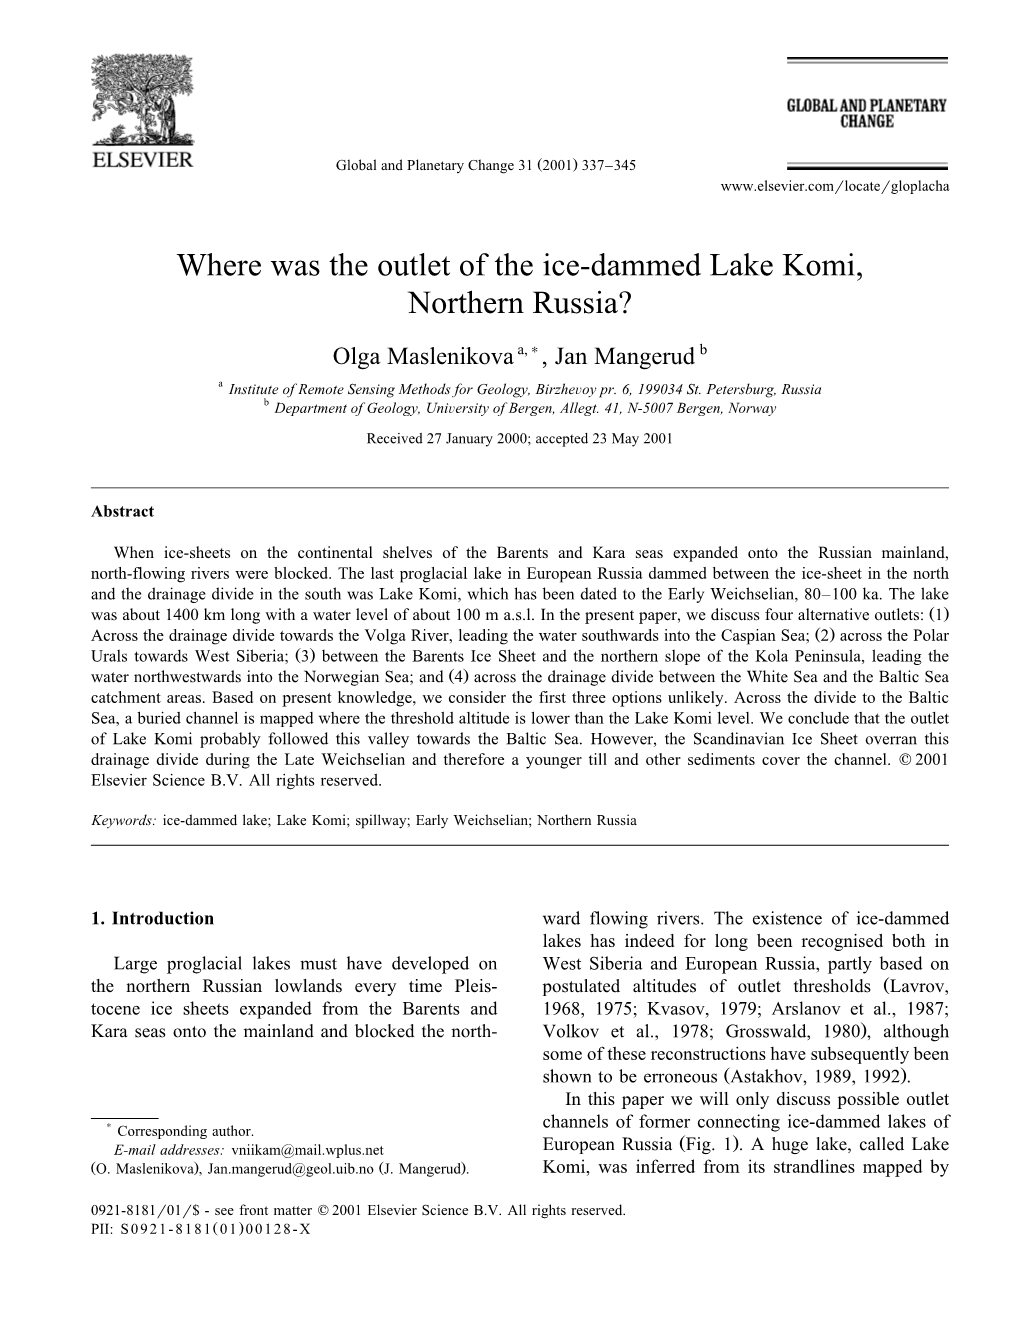 Where Was the Outlet of the Ice-Dammed Lake Komi, Northern Russia?